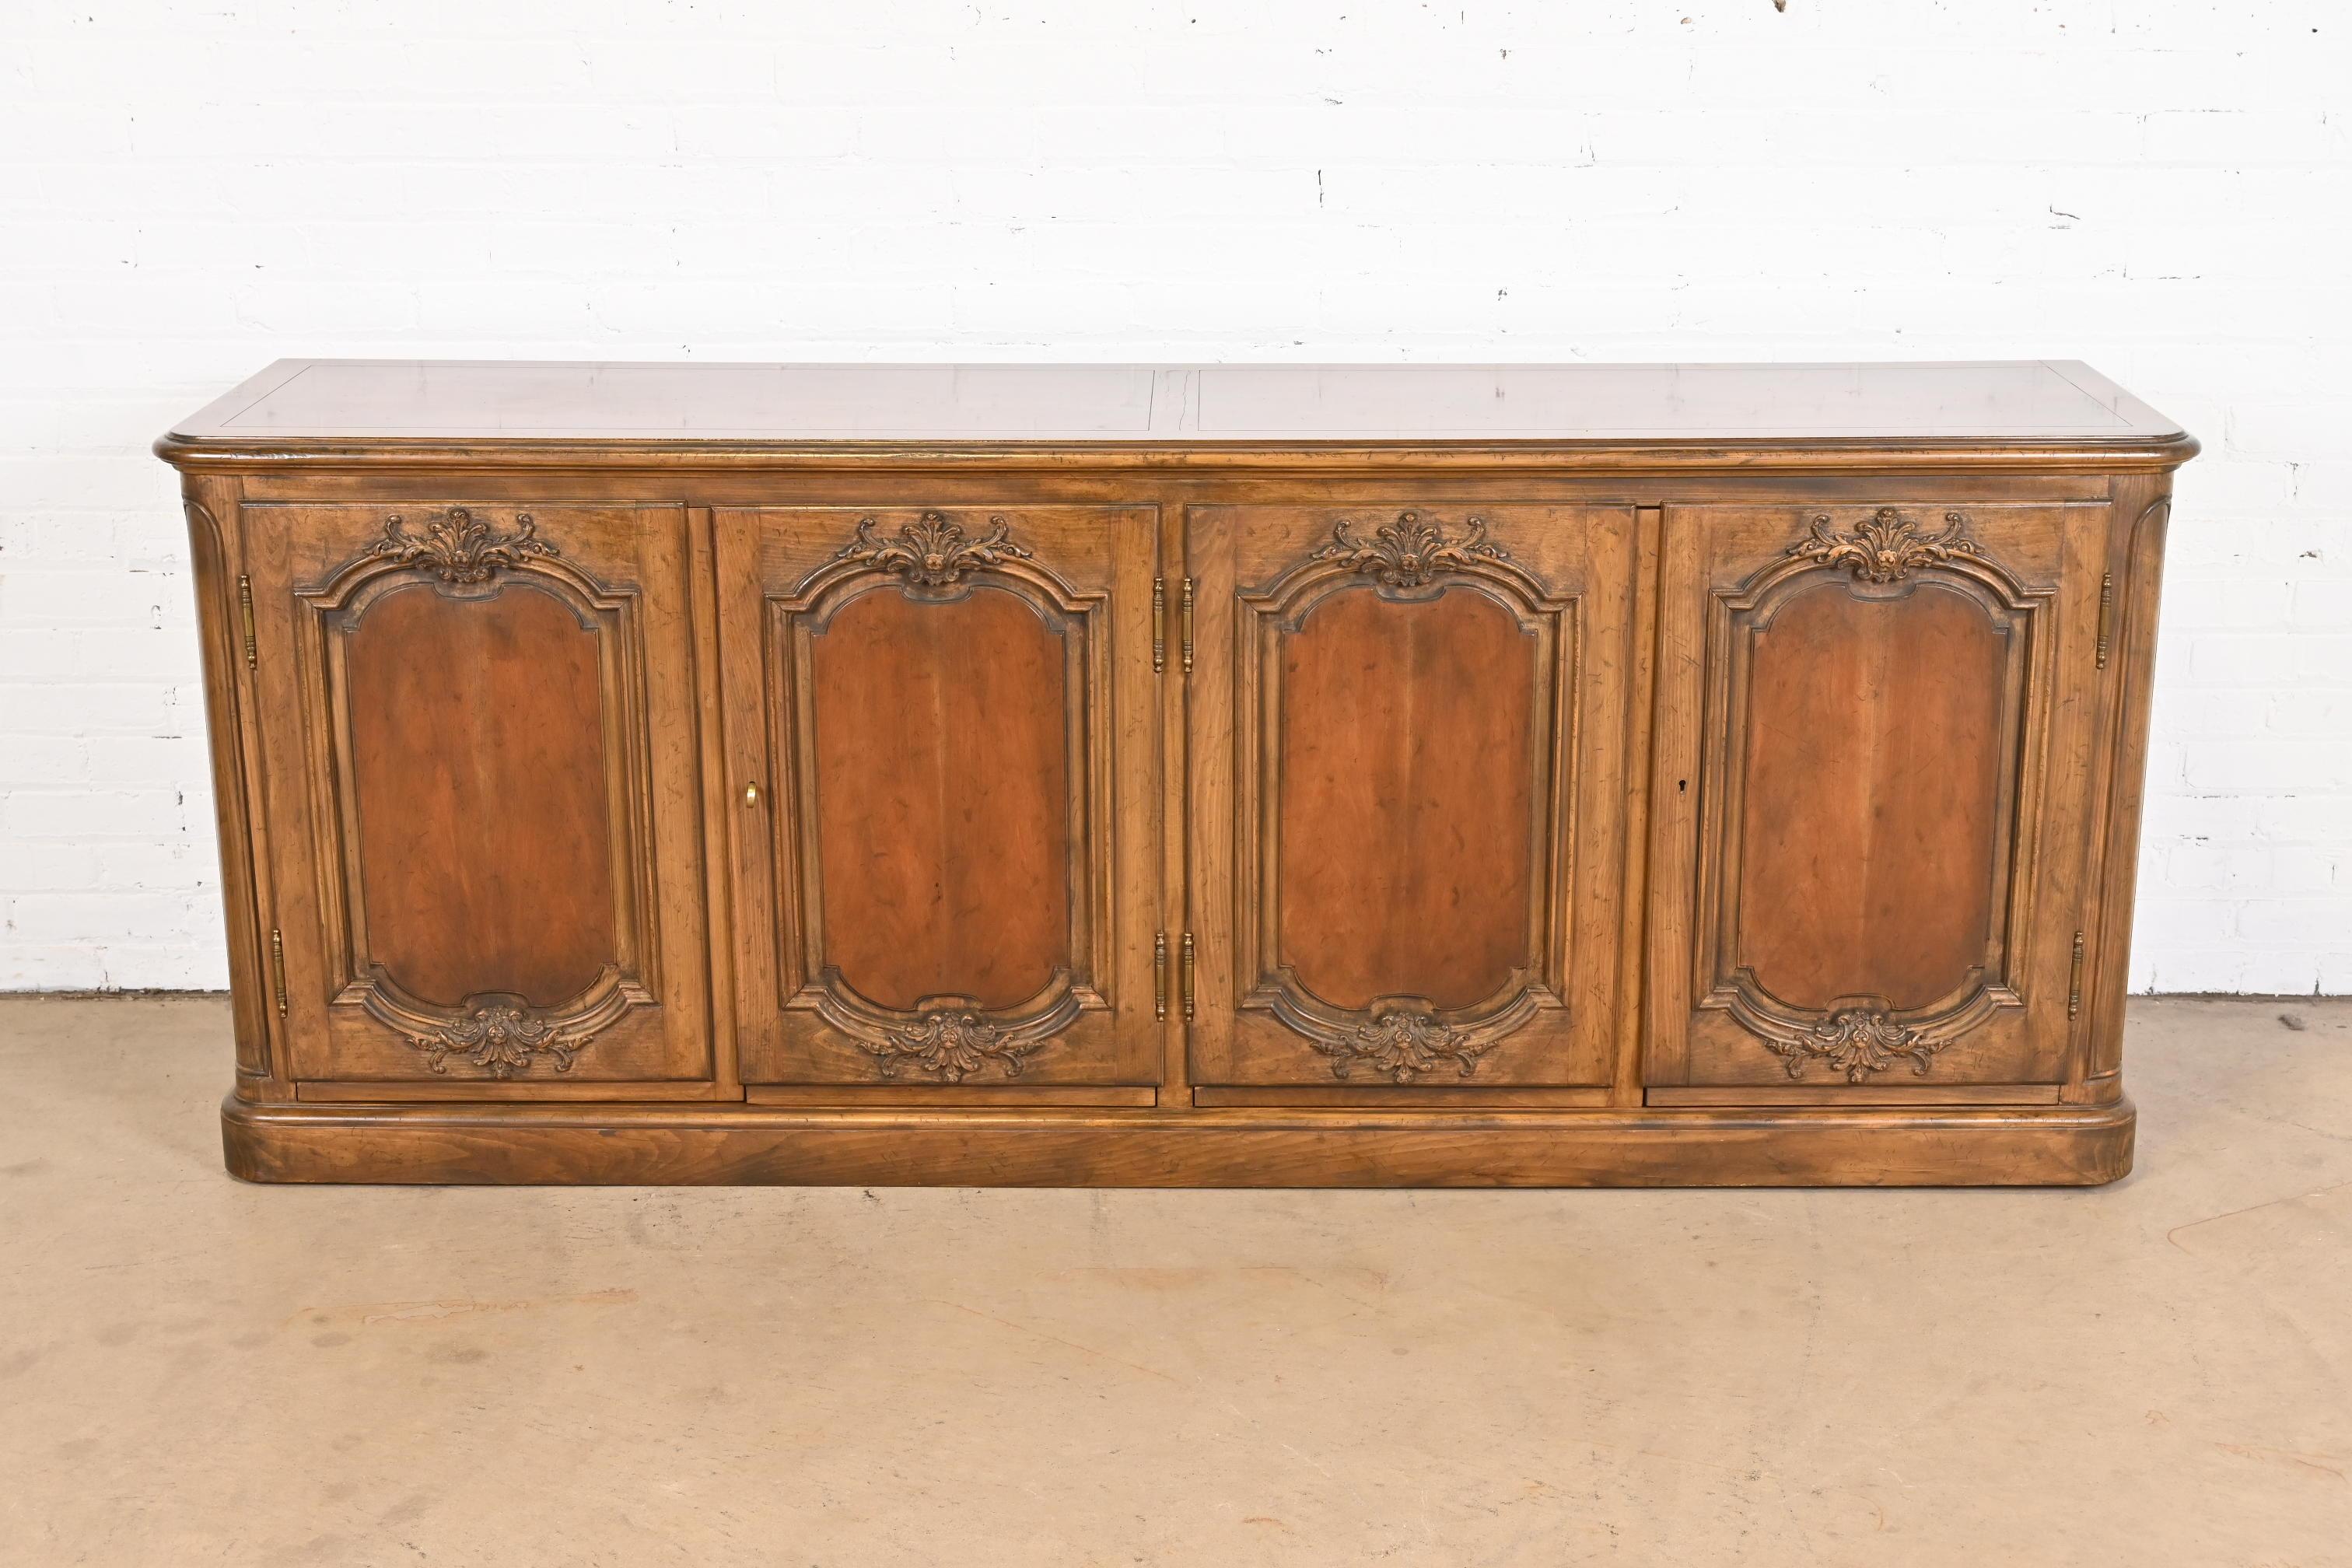 A gorgeous French Provincial Louis XV style carved walnut sideboard, credenza, or bar cabinet

By Baker Furniture

USA, Circa 1960s

Measures: 82.5